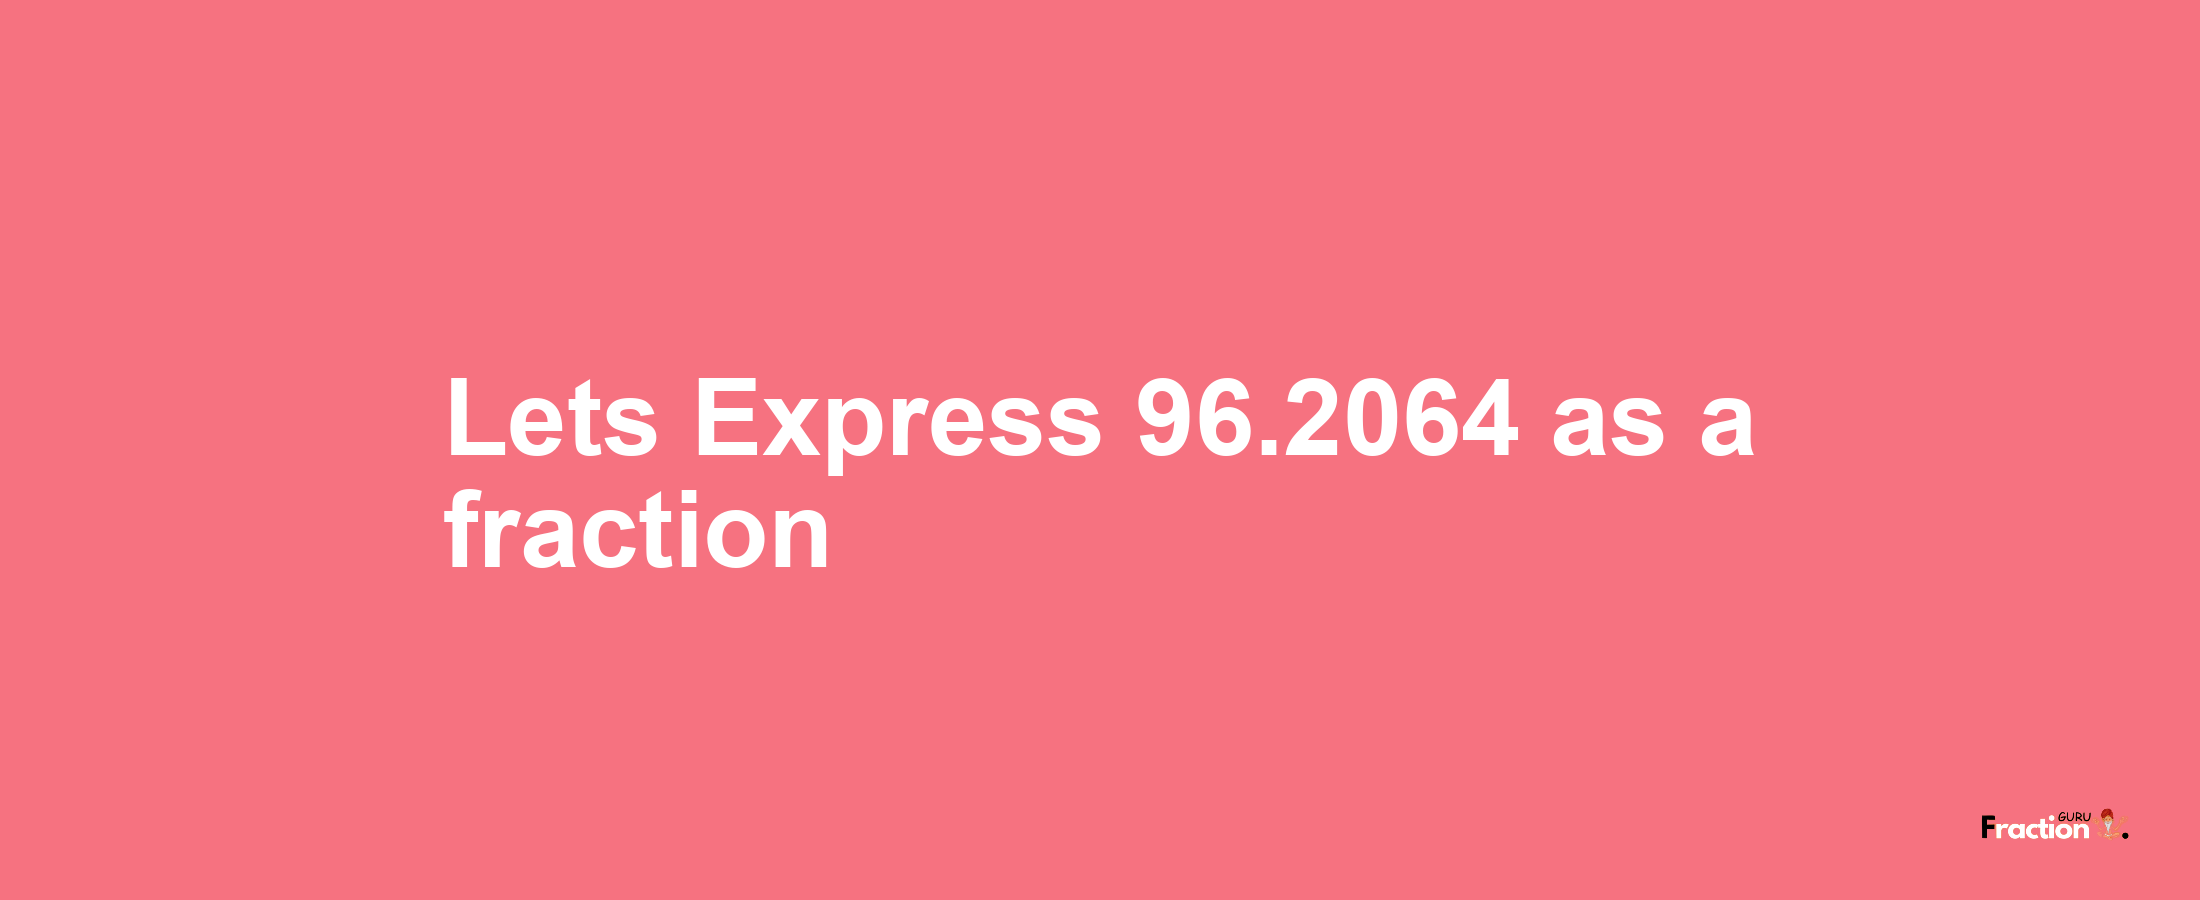 Lets Express 96.2064 as afraction